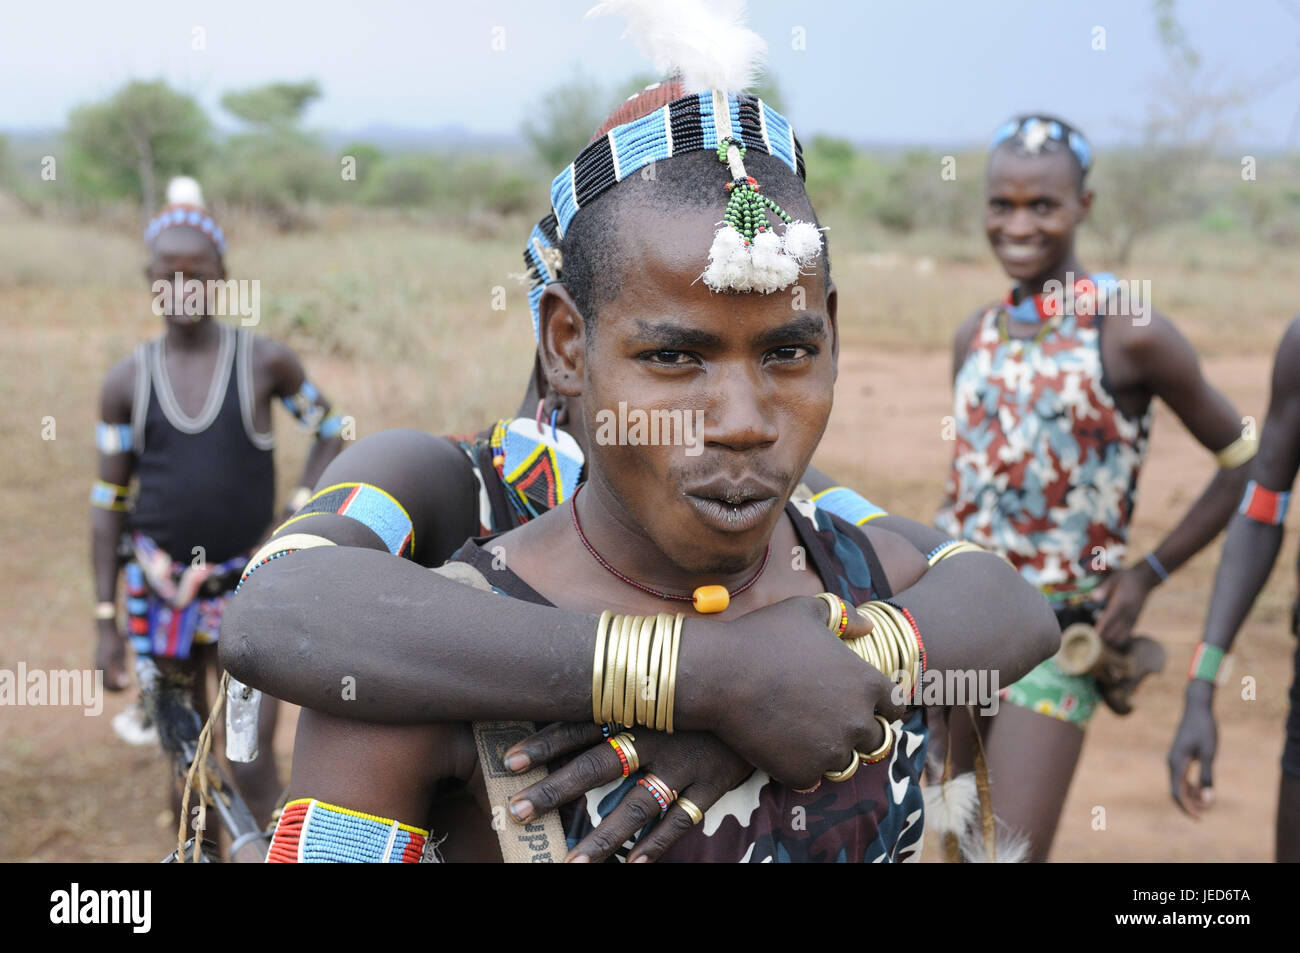 Men, young, 'Jumping of the Bull' ceremony, tribe Hamar, southern Omotal, Ethiopia, Stock Photo